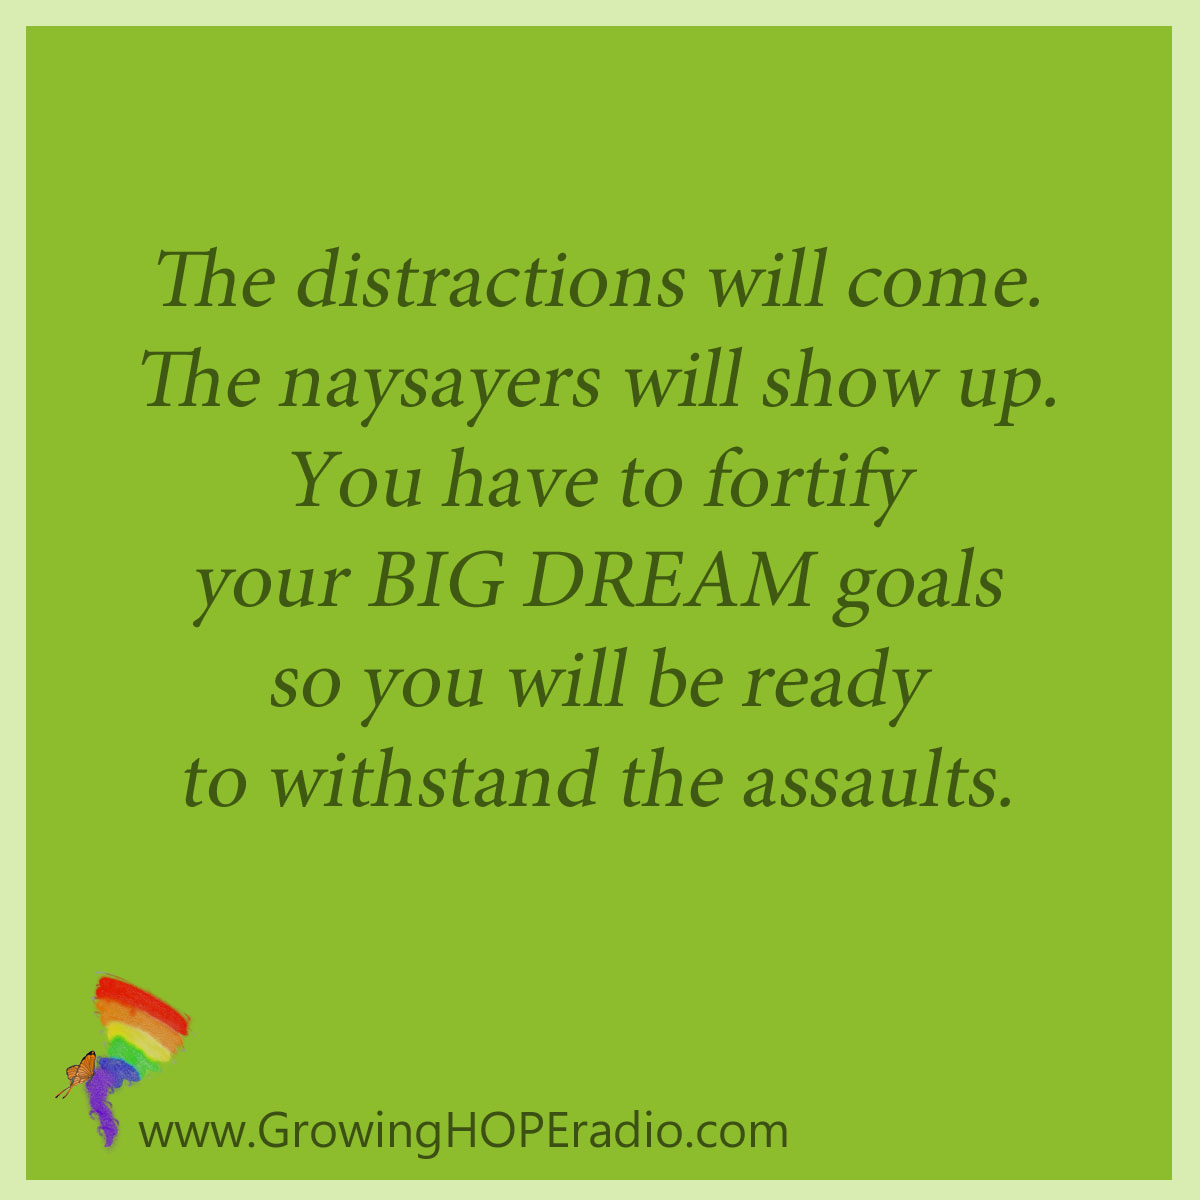 Growing HOPE daily - quote - fortify your big dreams